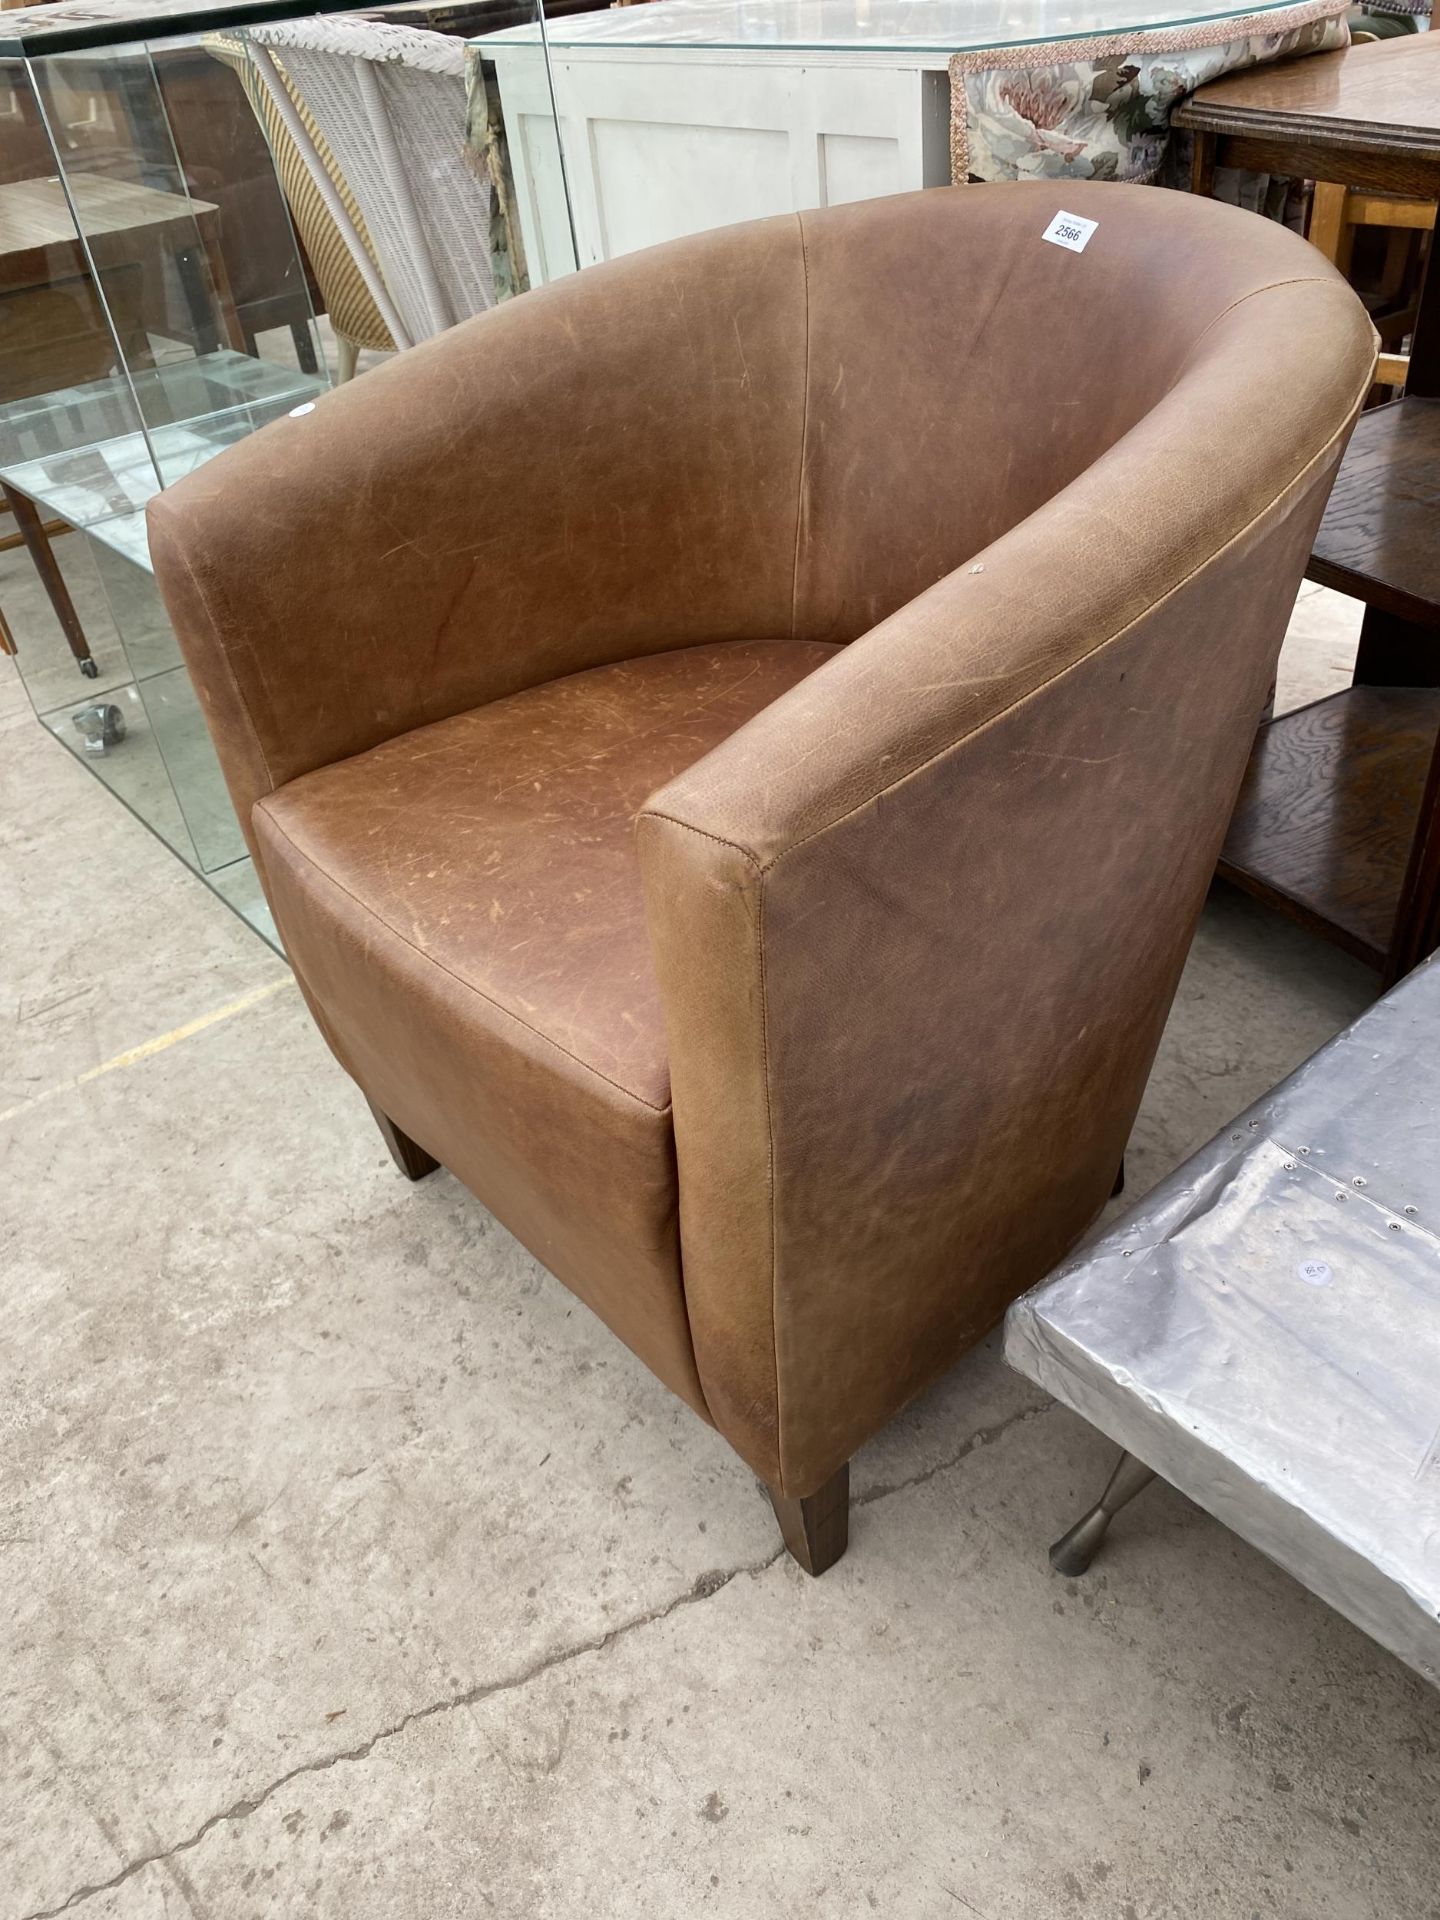 A VINTAGE CONTRACTS LEATHER TUB CHAIR - Image 2 of 2